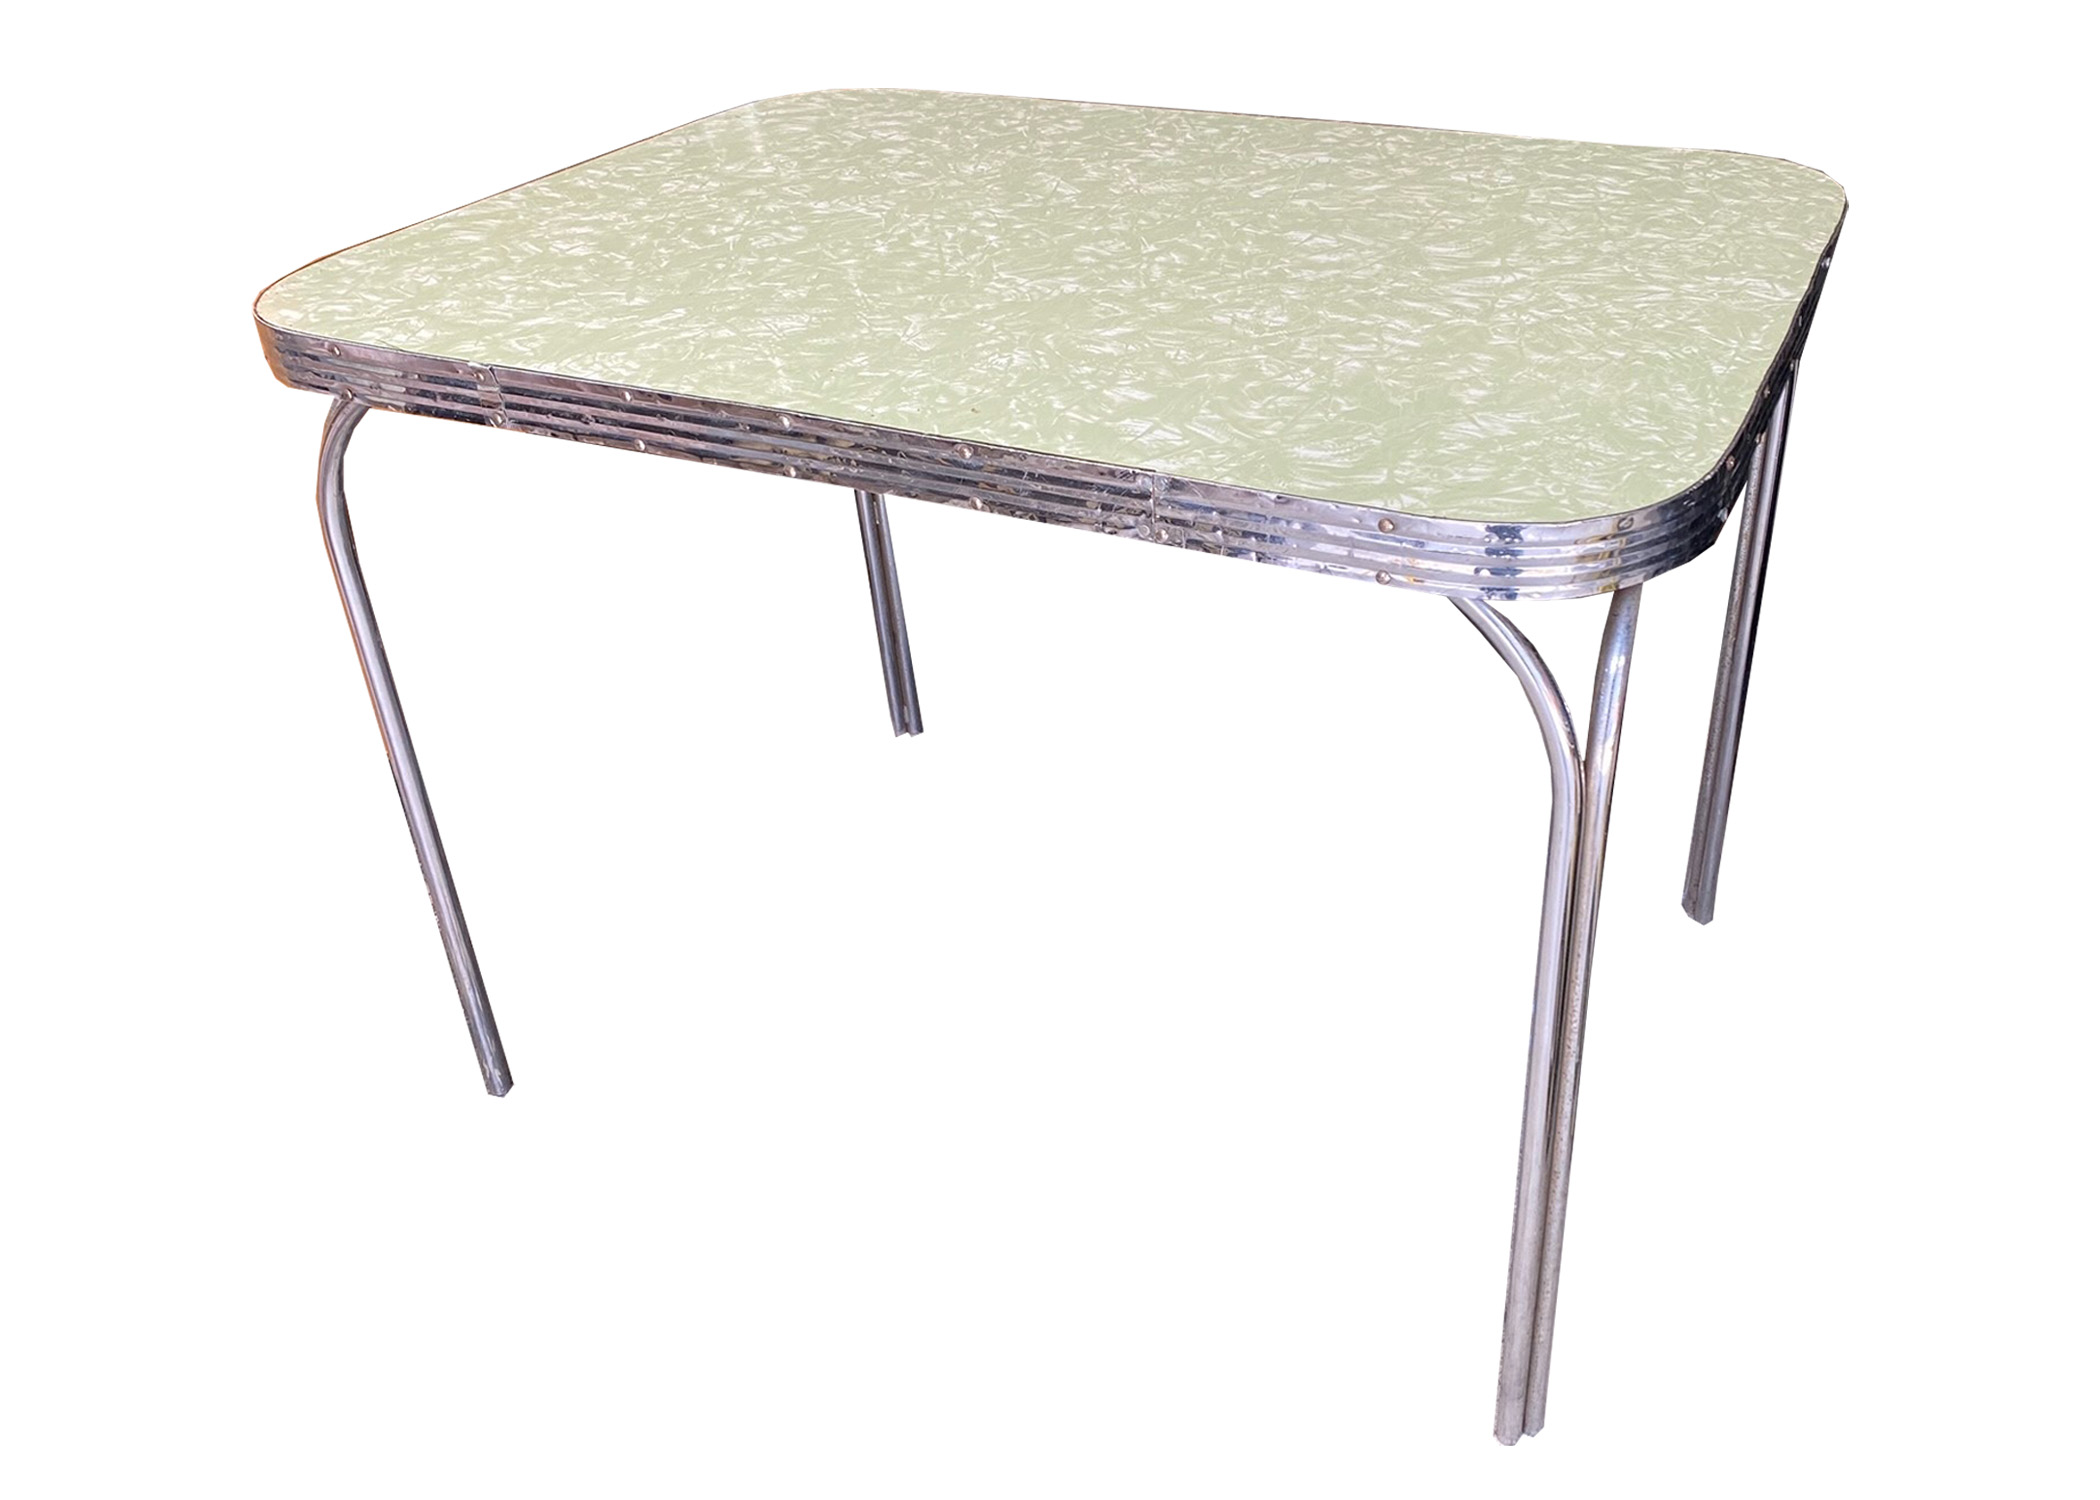 green formica kitchen table